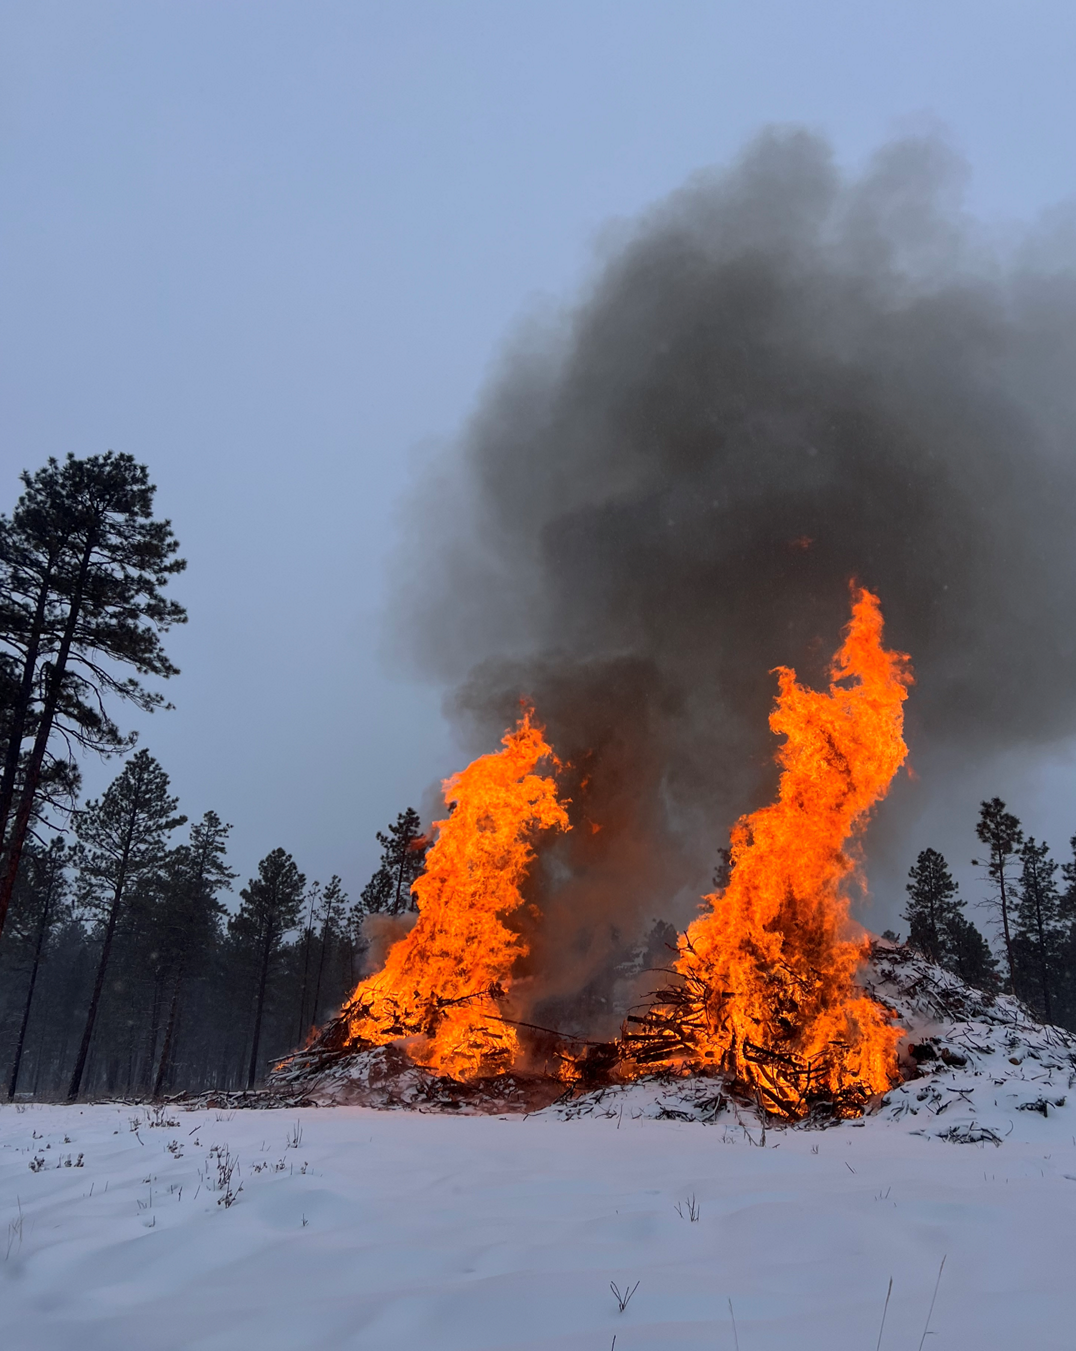 Image with two large slash piles burning with large orange flames, dark smoke, Piles are surrounded by snow.